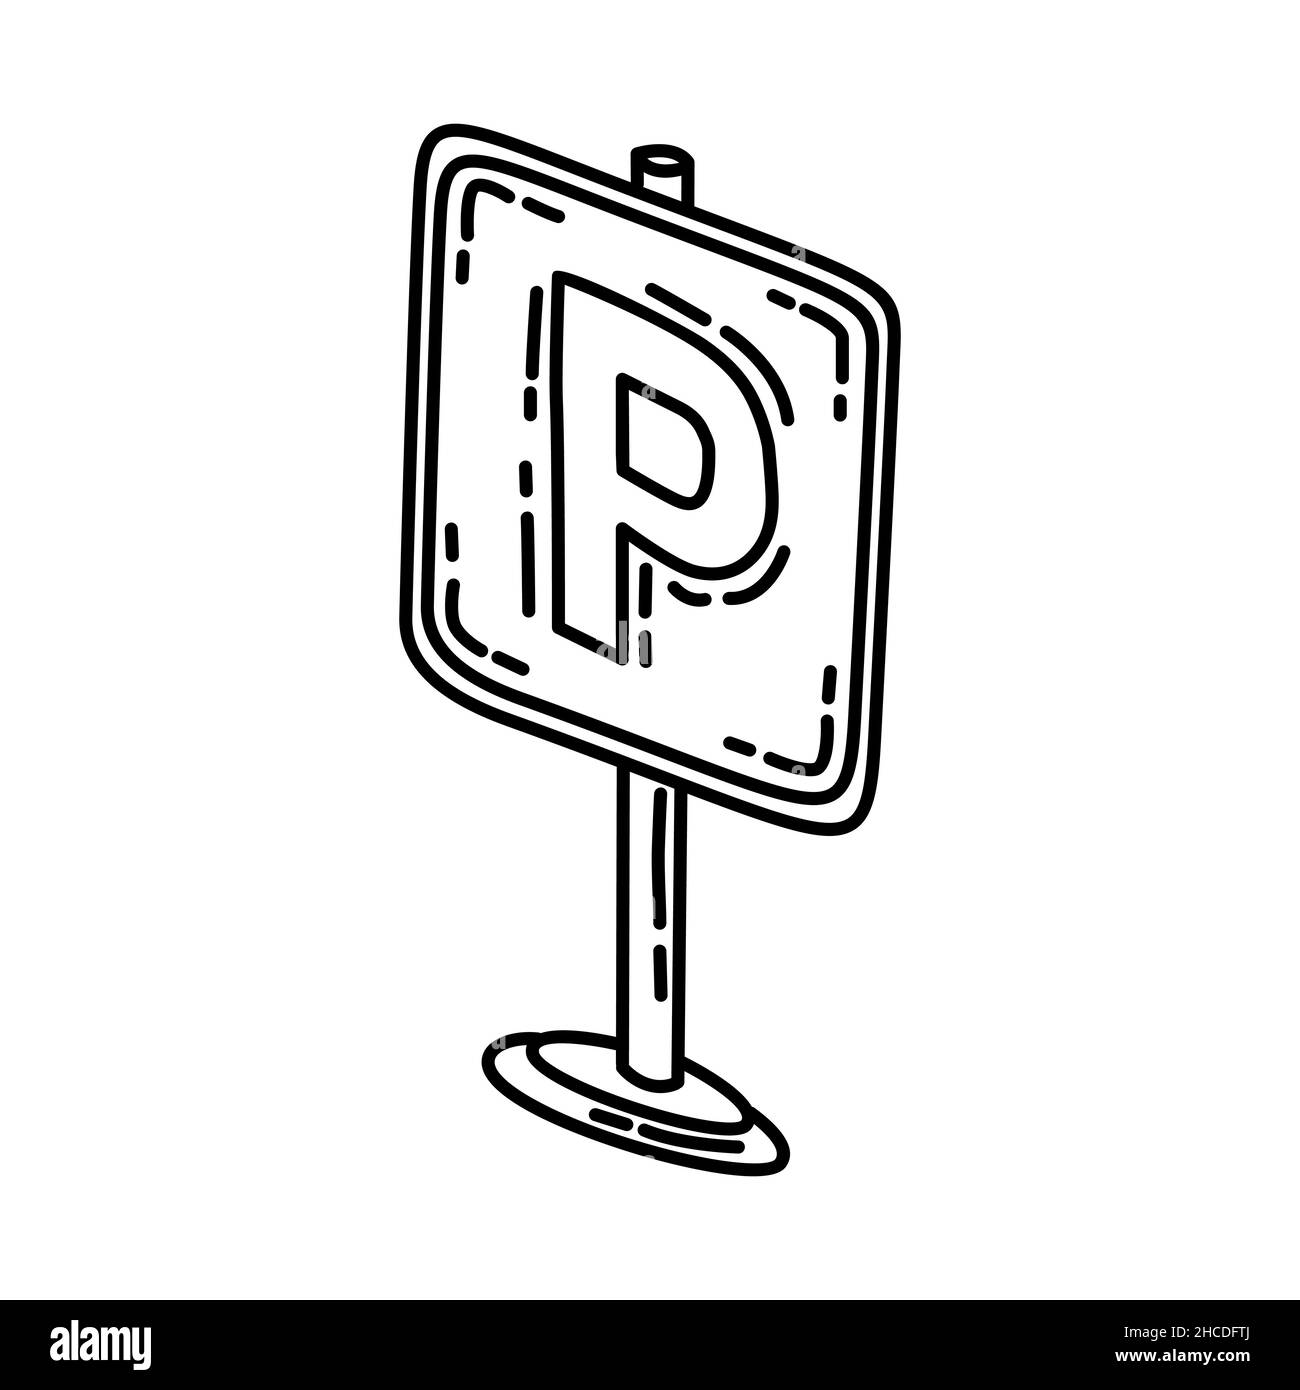 Parking Lot Part of Traffic Signs Hand Drawn Icon Set Vector. Stock Vector